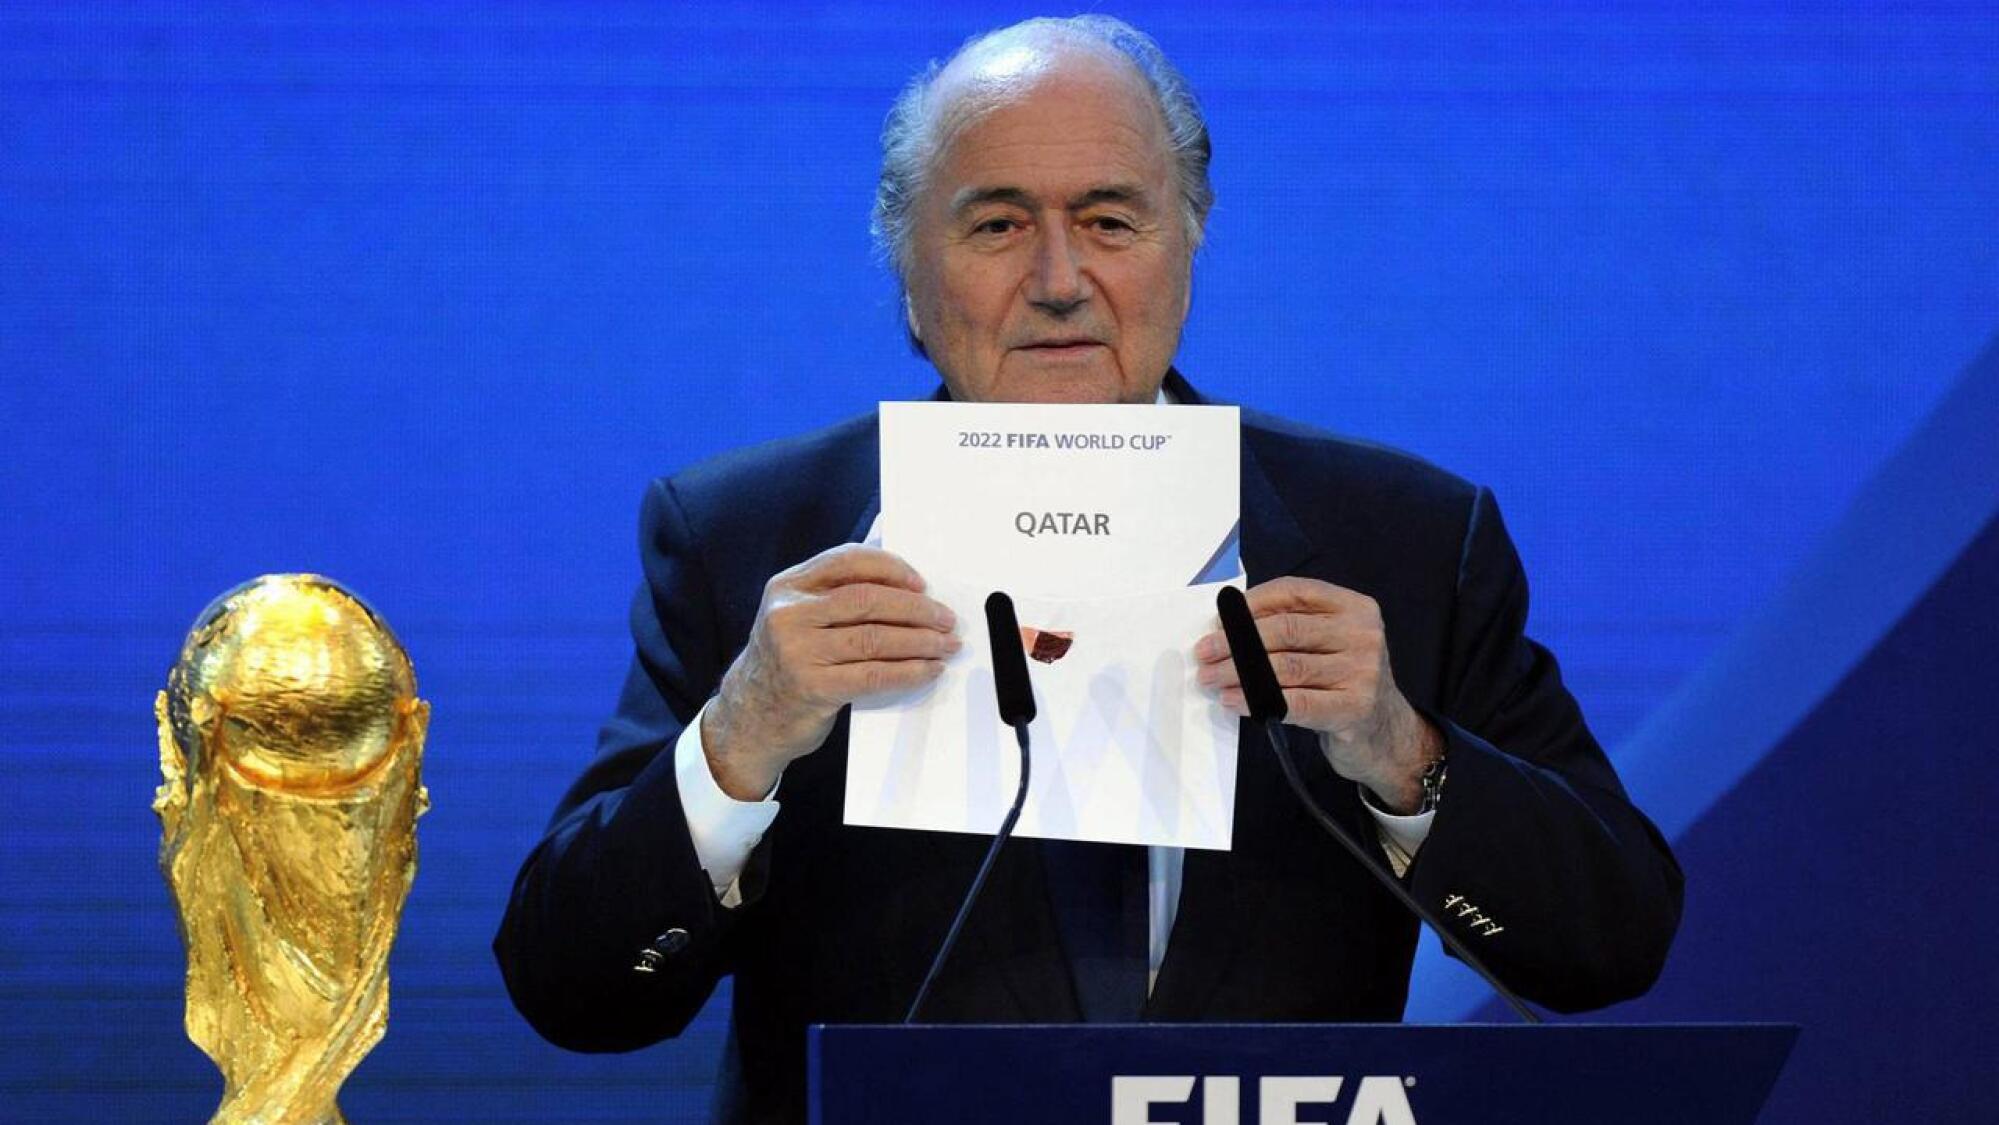 Former Fifa president Sepp Blatter announces that Qatar will be hosting the 2022 Football World Cup